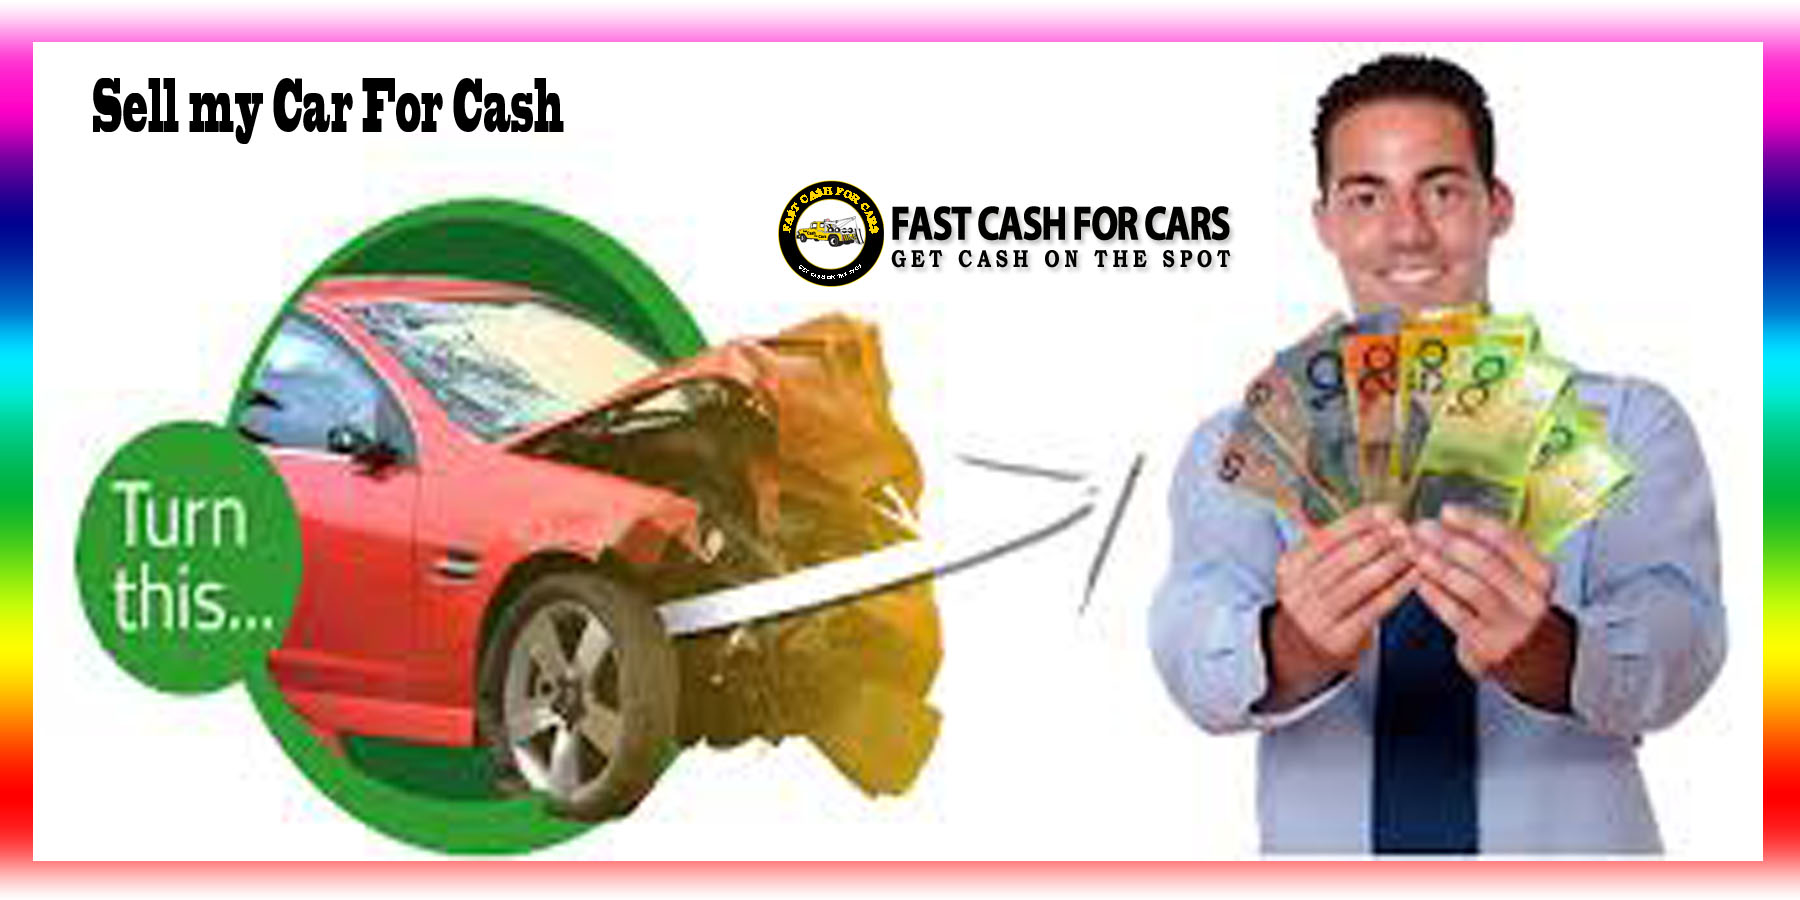 Money Cash cars. Sell my Scrap car for Cash. Best Cash cars. Quick Cash for cars NJ. Sell my car